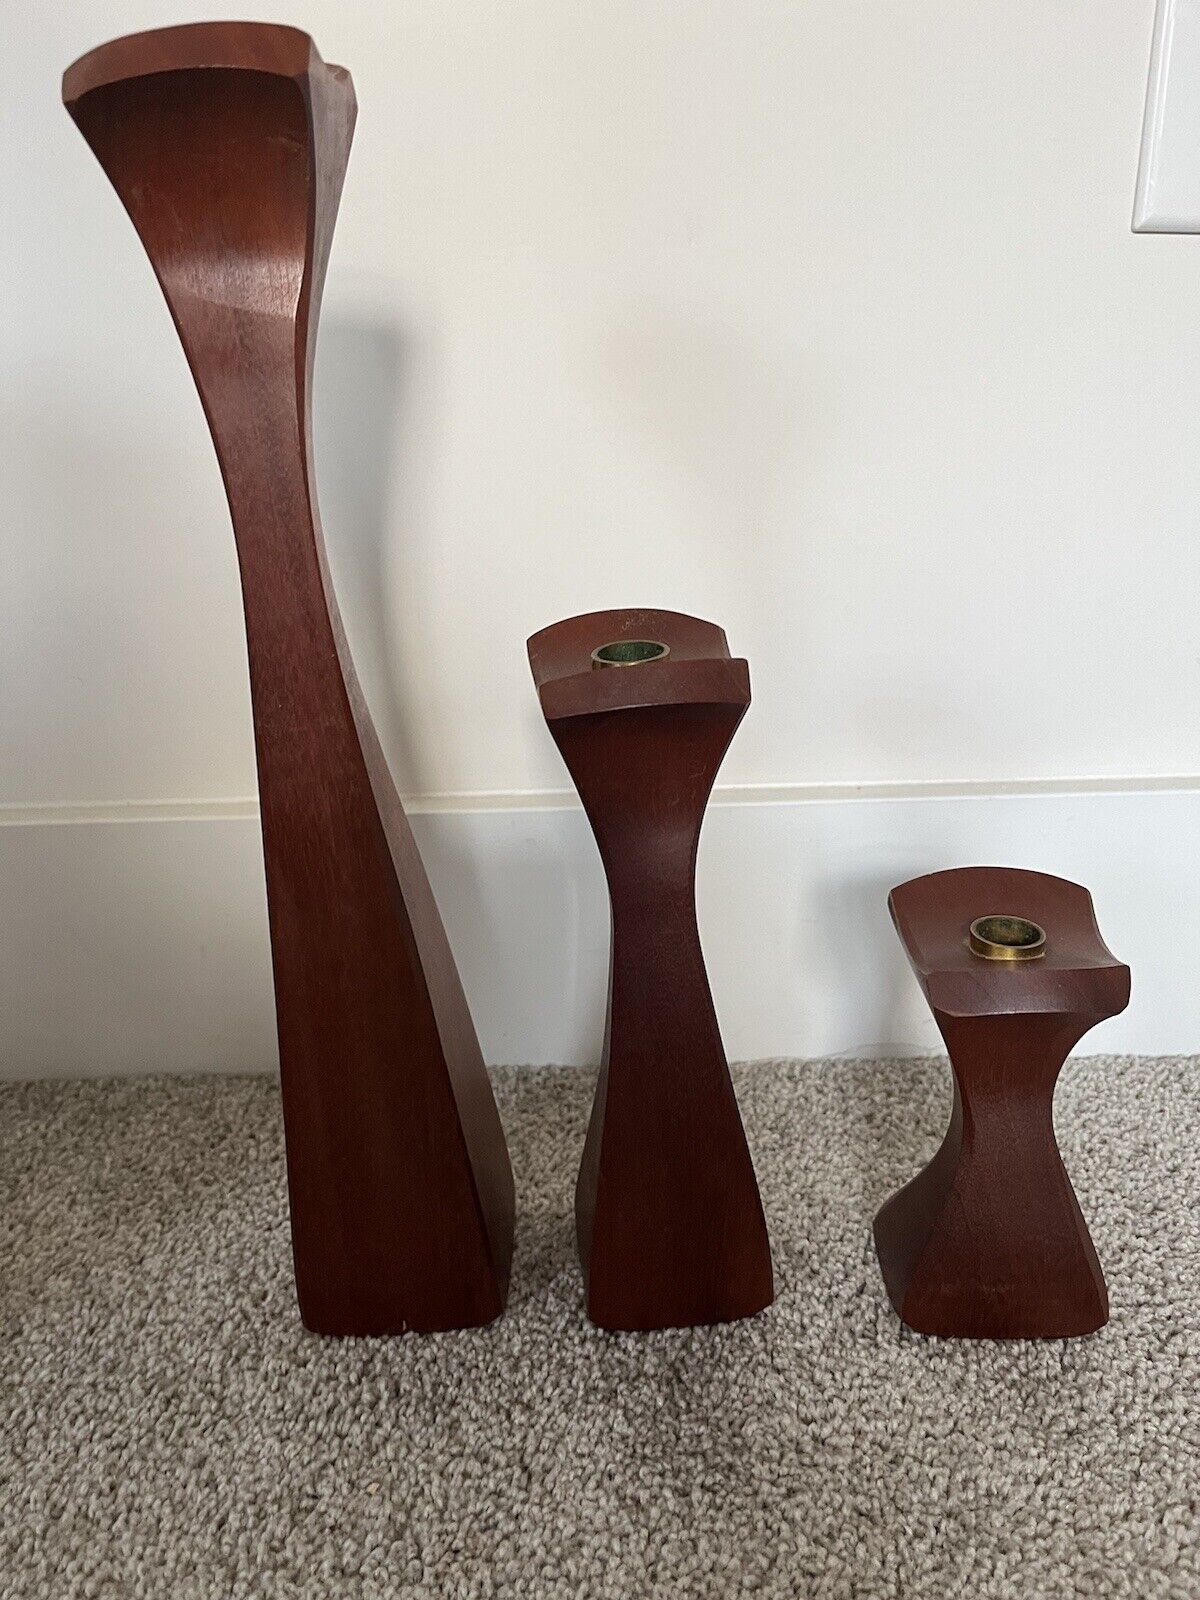 Vintage Signed Mark Strom Mid-Century Modern Wooden Candle Holders, Set of 3